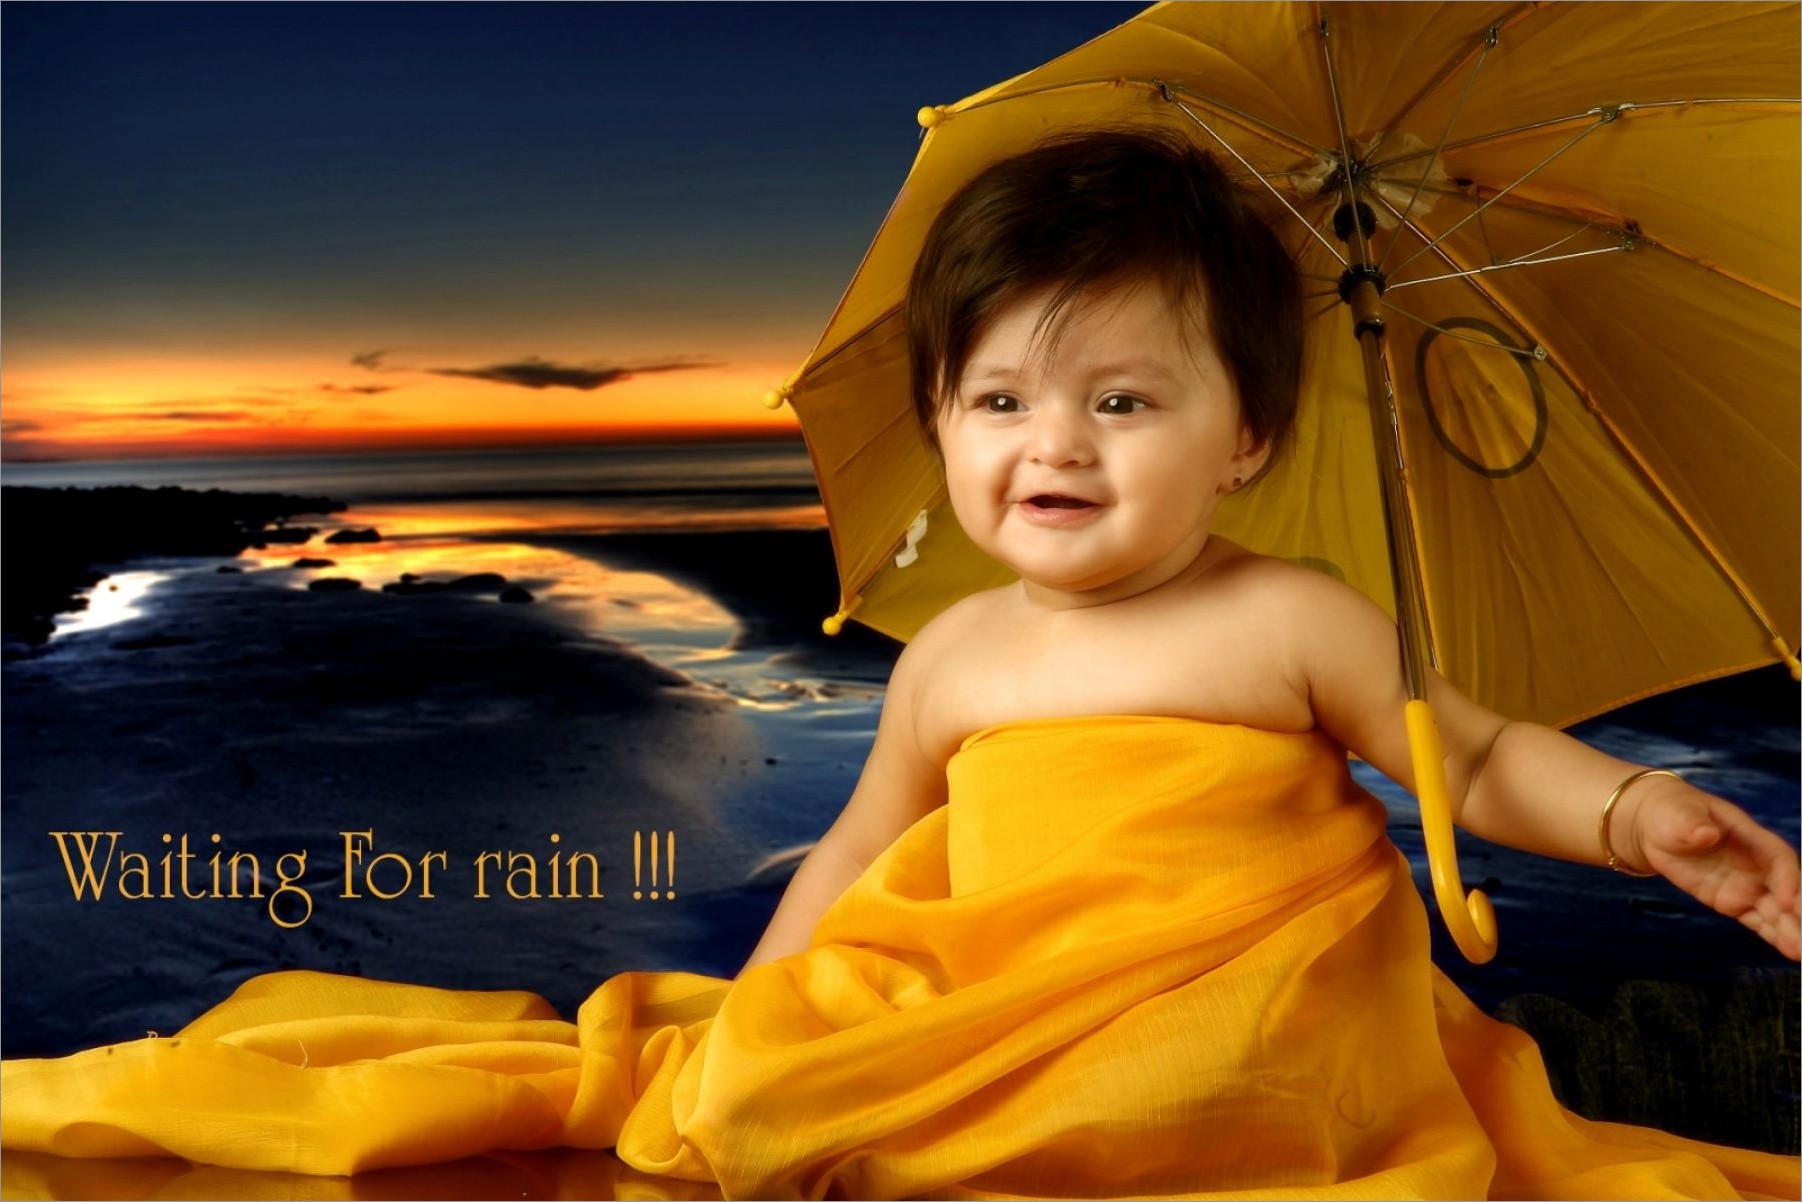 Beautiful Baby Wallpapers For Mobile Hd @wallpapercools - Real Wallpaper  Cute Baby - 1802x1202 Wallpaper 